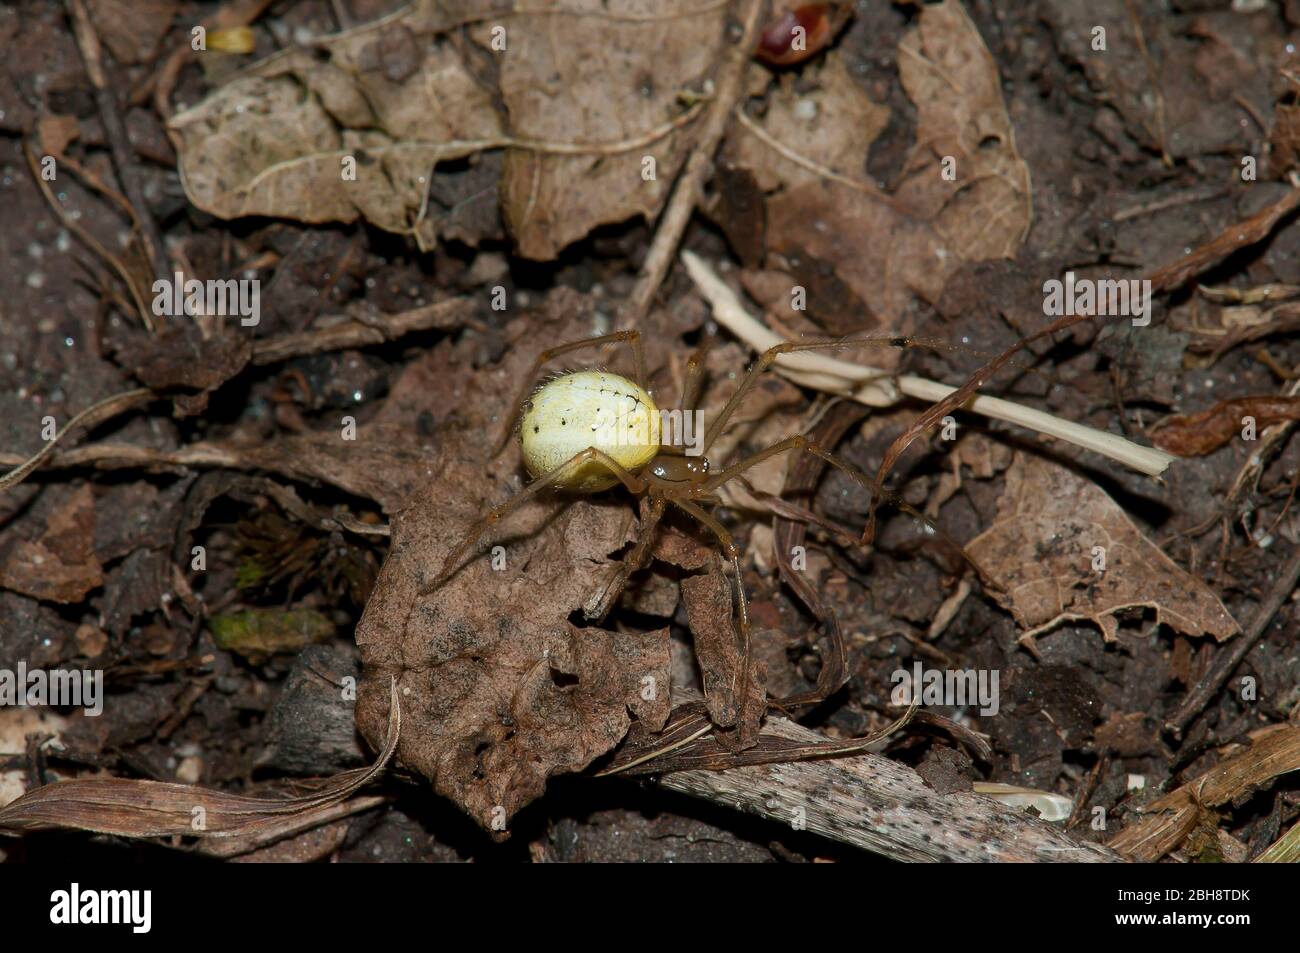 Orb spider, Enoplognatha ovata, crawling on the ground, Bavaria, Germany Stock Photo